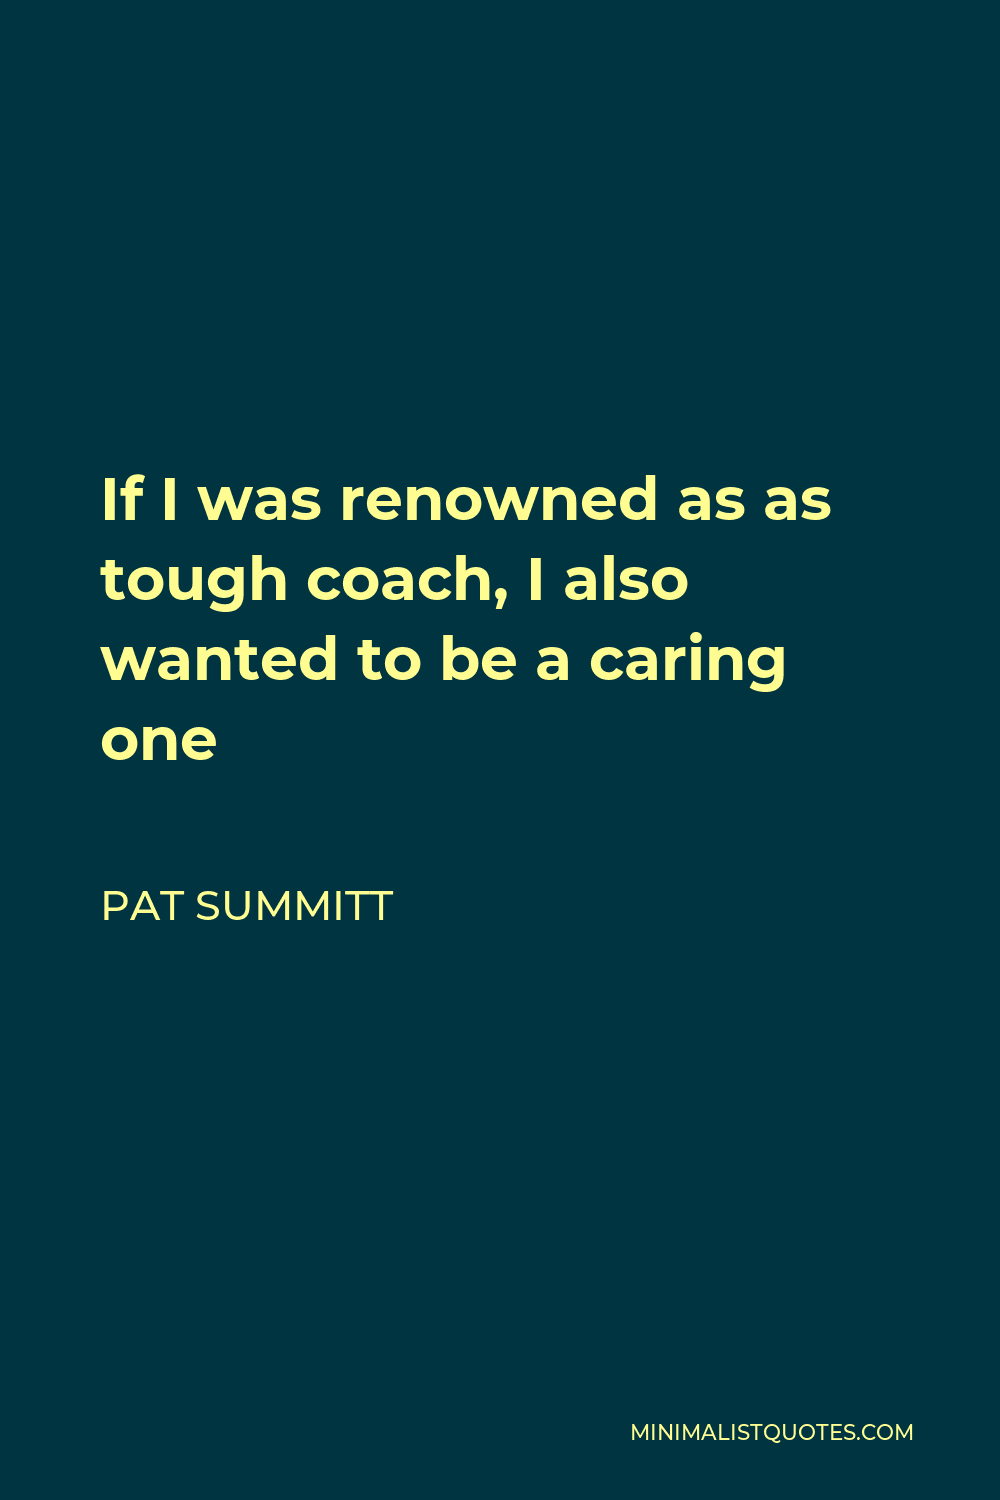 Pat Summitt Quote - If I was renowned as as tough coach, I also wanted to be a caring one